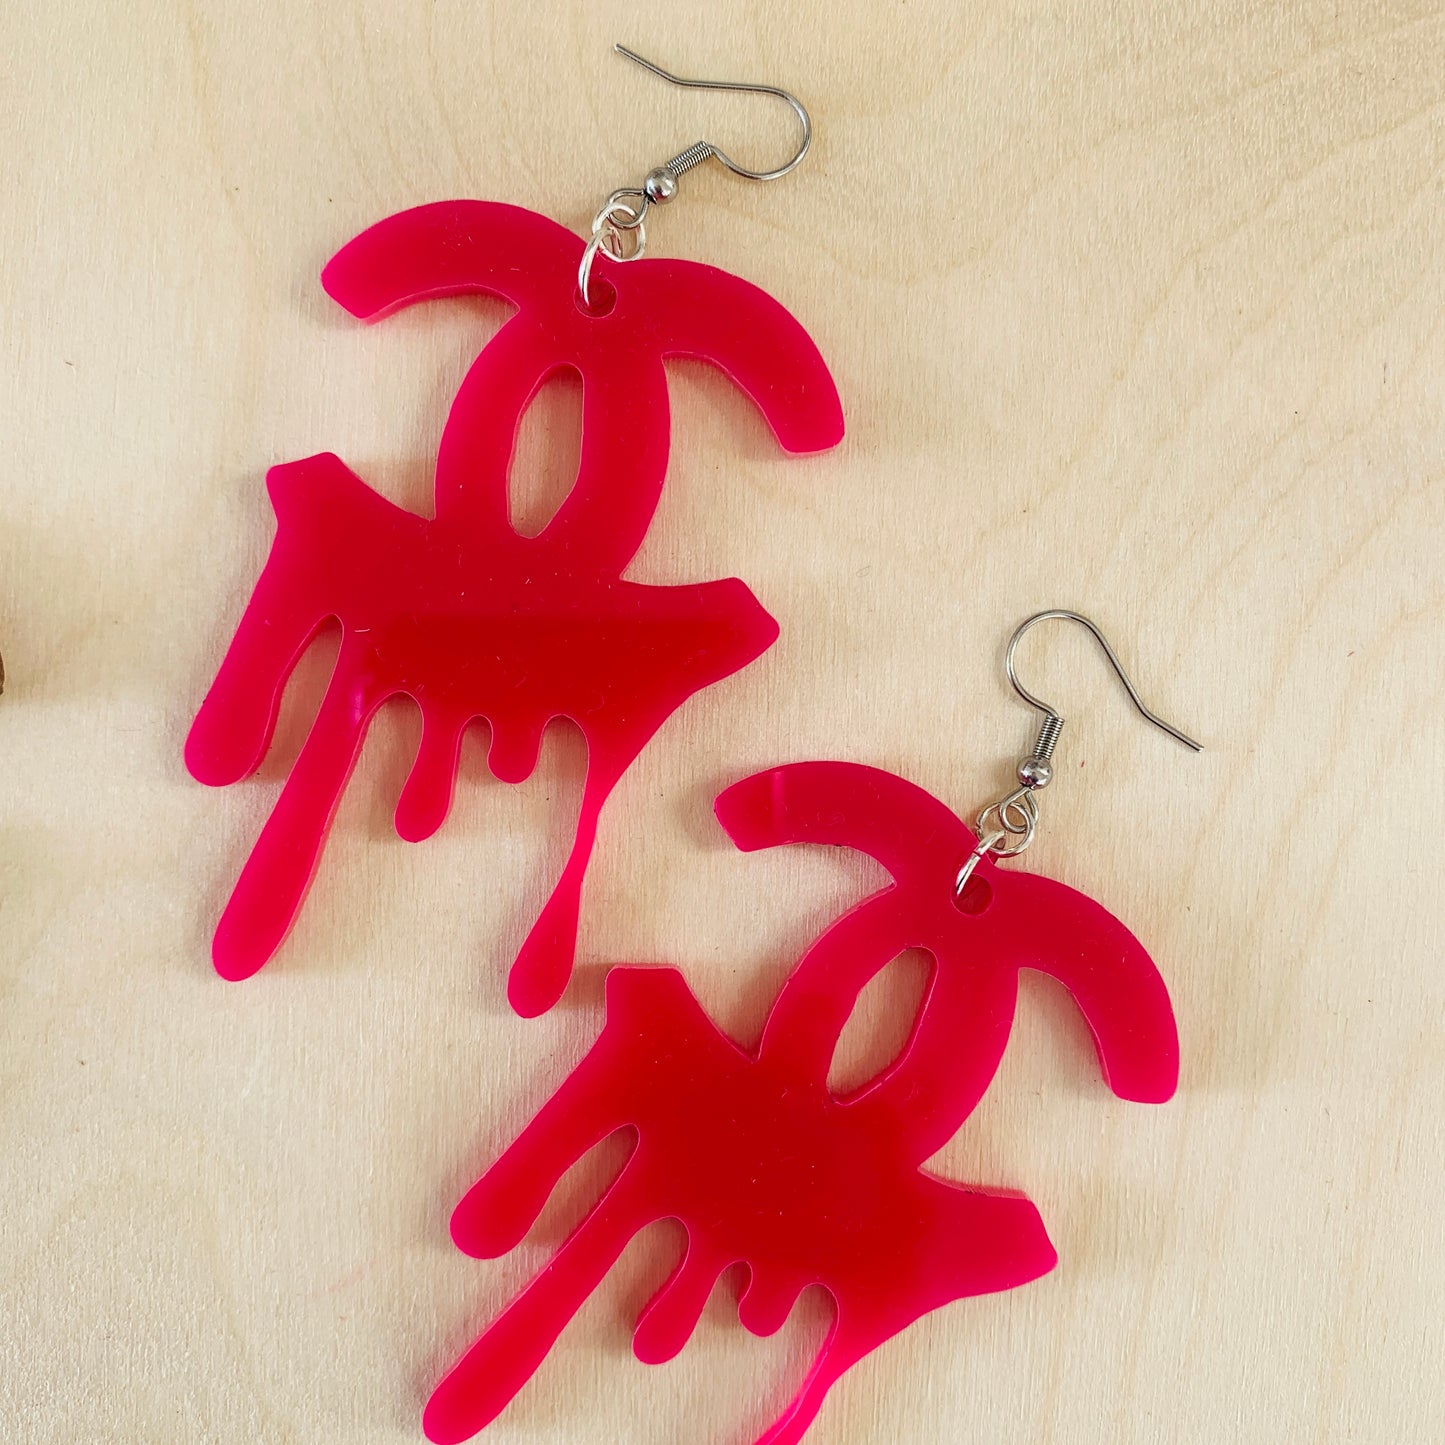 Just Dripping - Statement Earrings